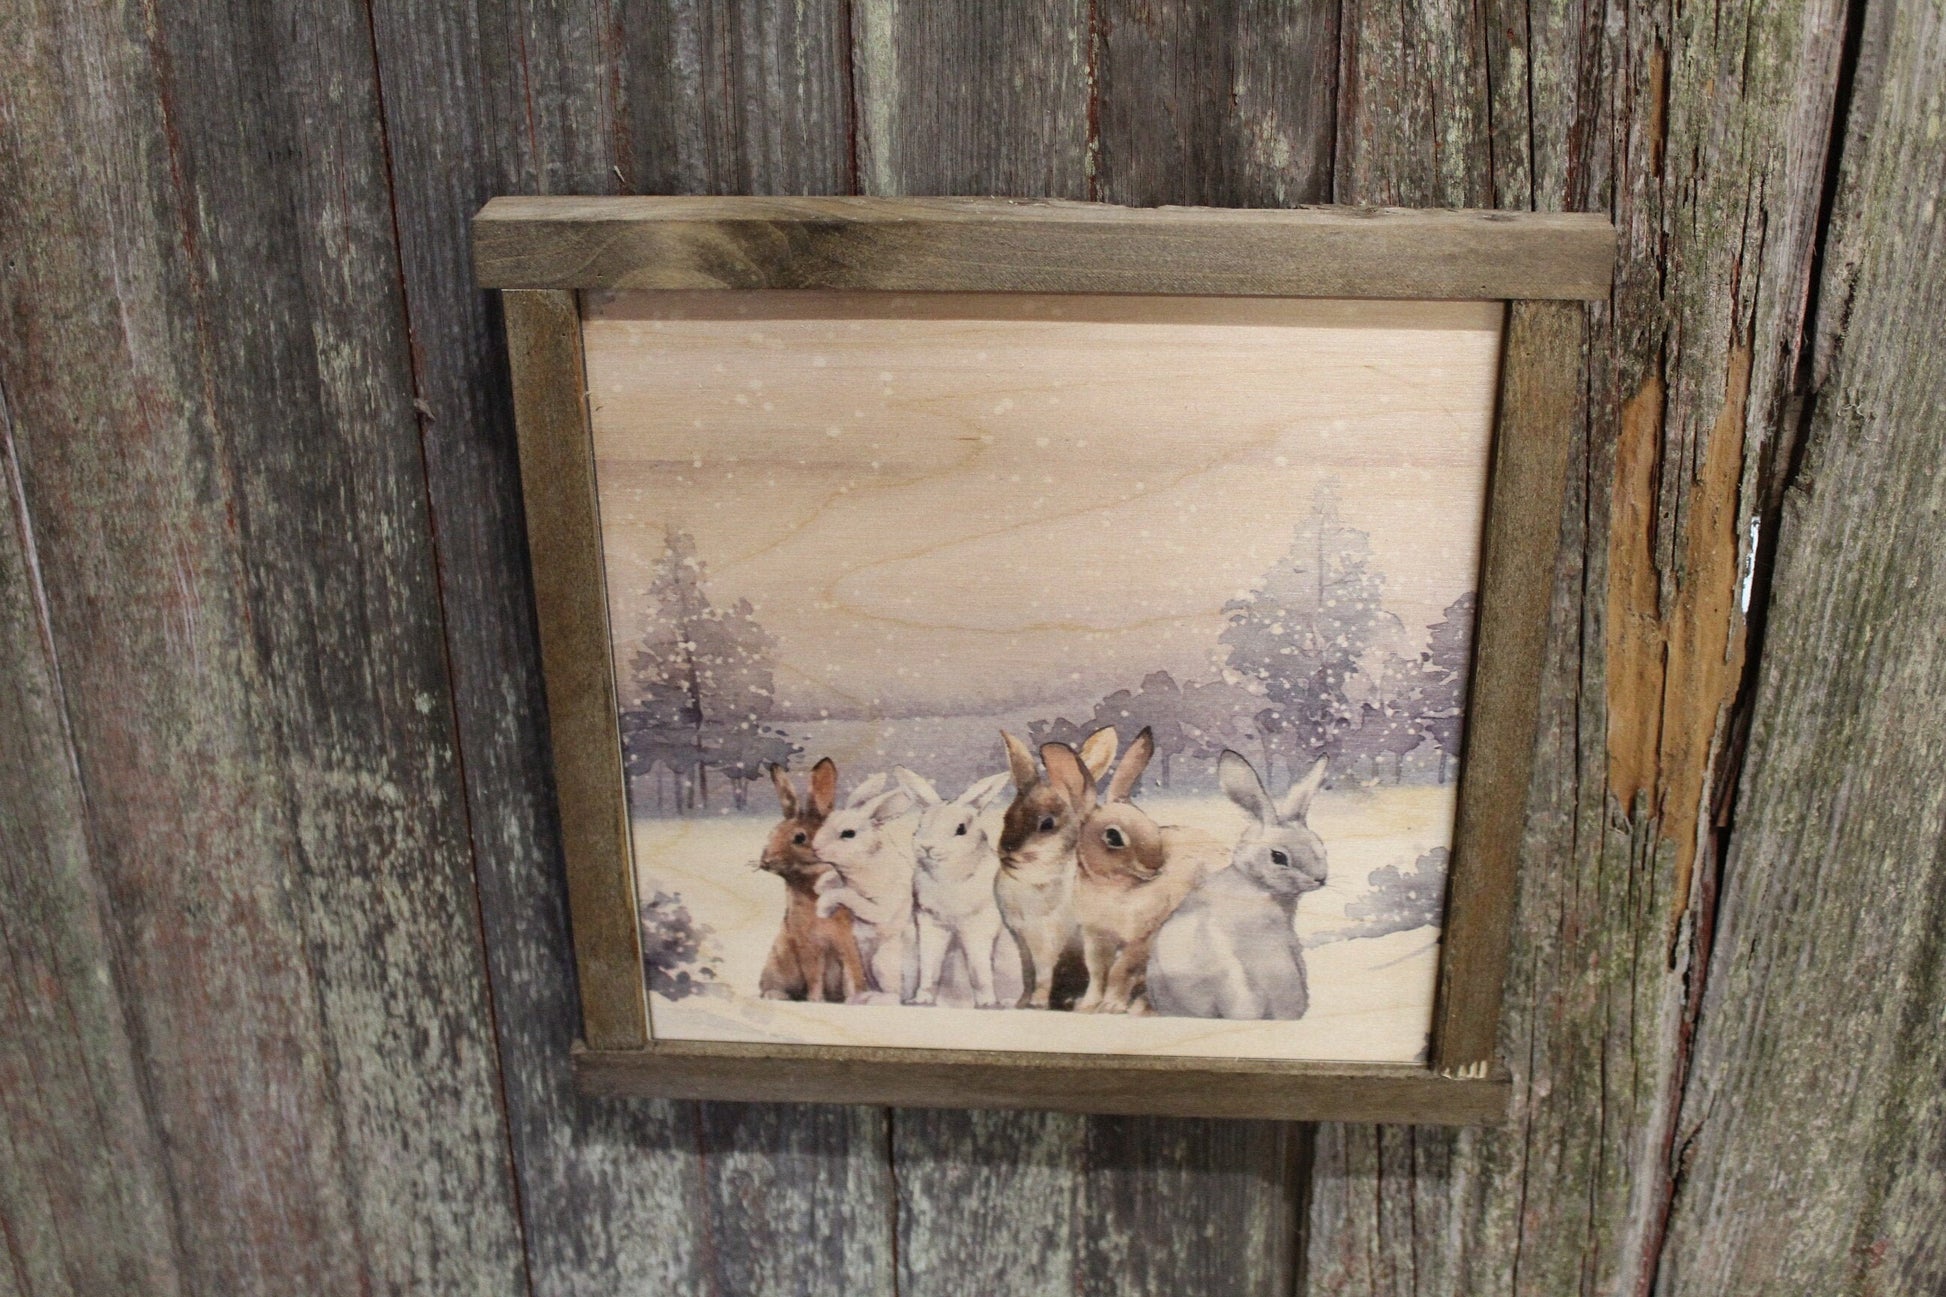 Bunny Framed Winter Scene Rabbit Hare Winter Snow Forest Scenery Rustic Vintage Wooden Sign Wall Decor Art Plaque Wood Print Farmhouse